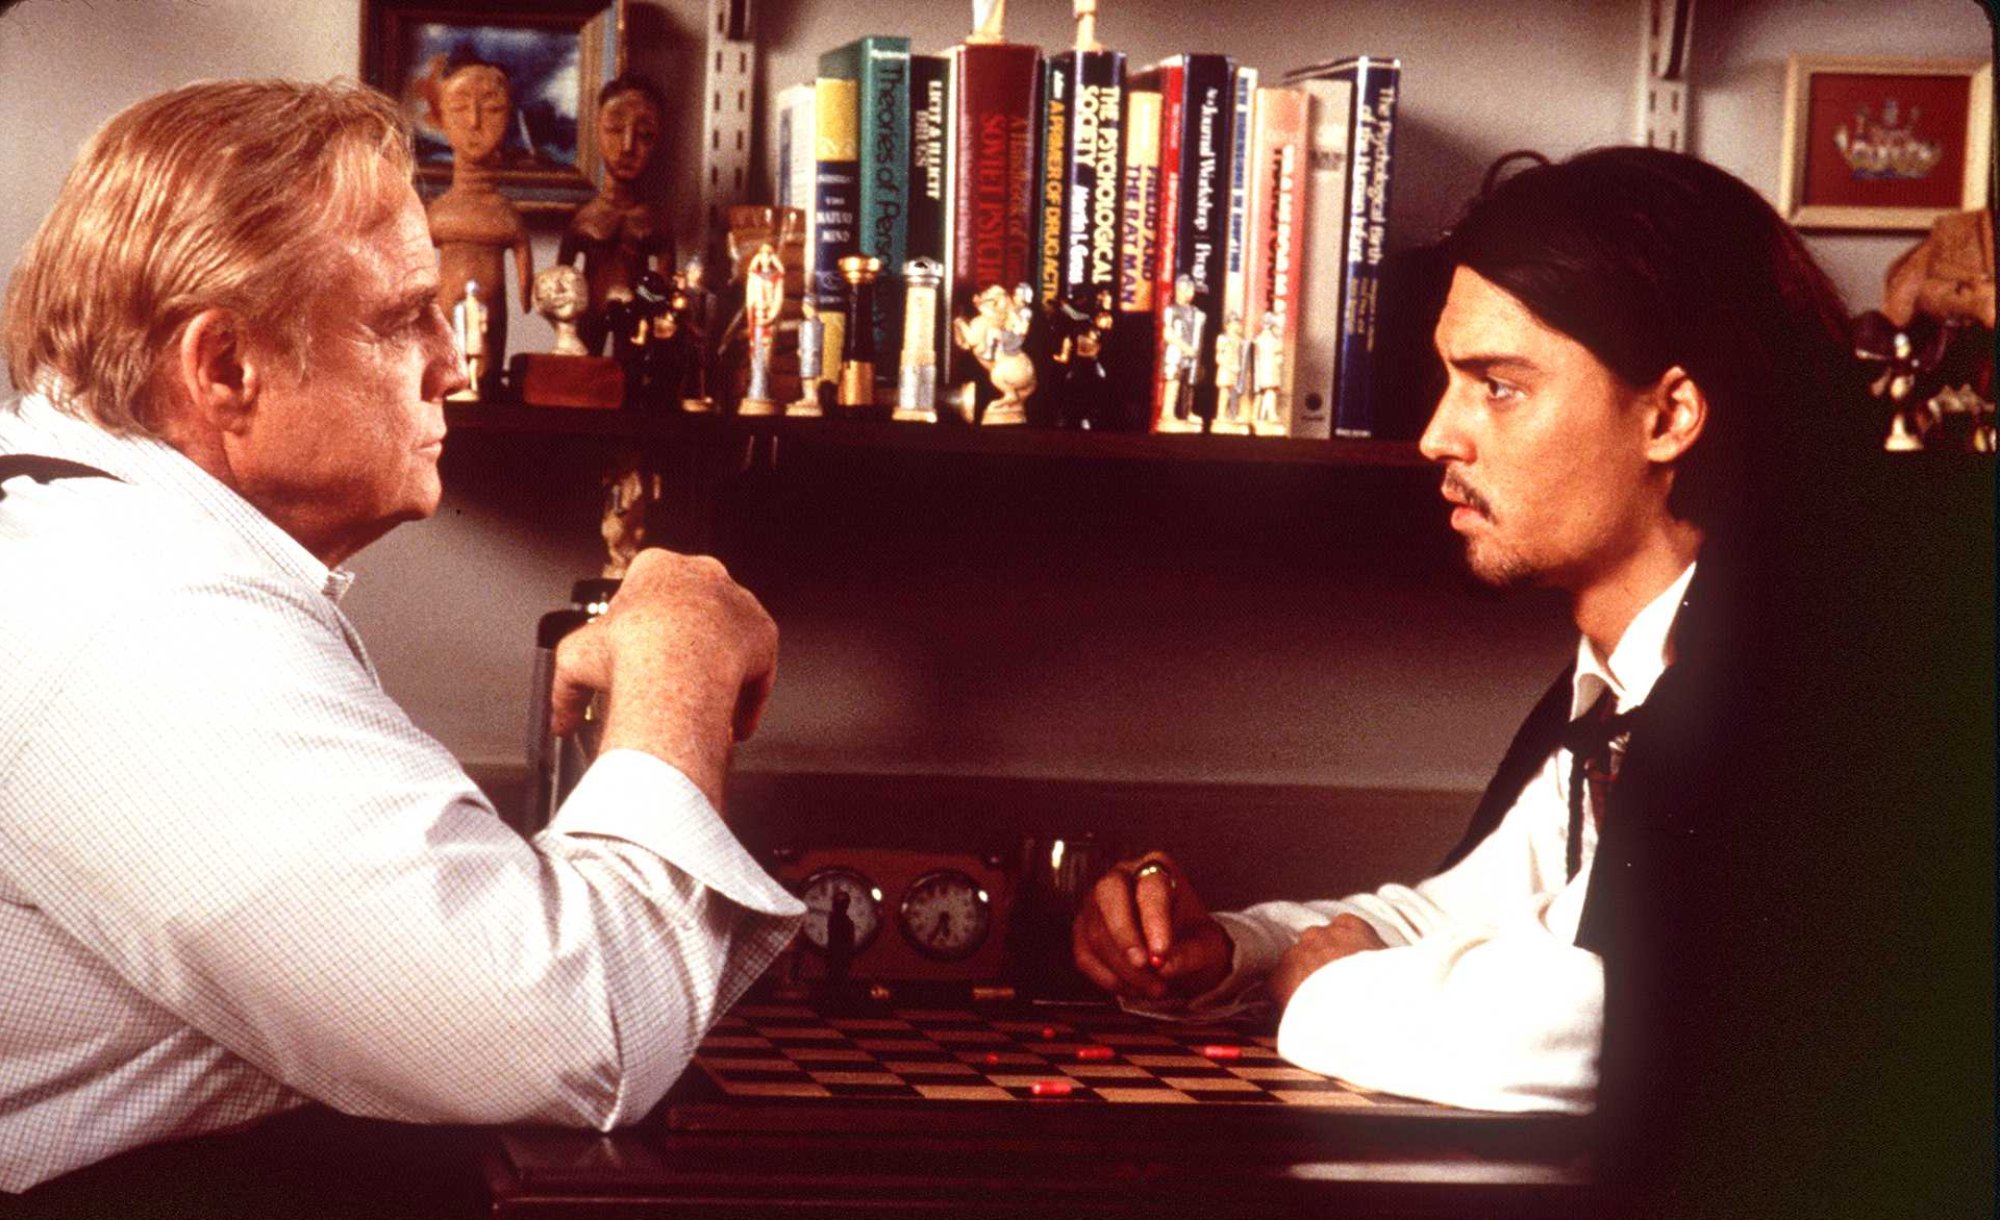 'Don Juan DeMarco' Marlon Brando as Dr. Jack Mickler and Johnny Depp as Don Juan DeMarco sitting across from one another wearing white shirts